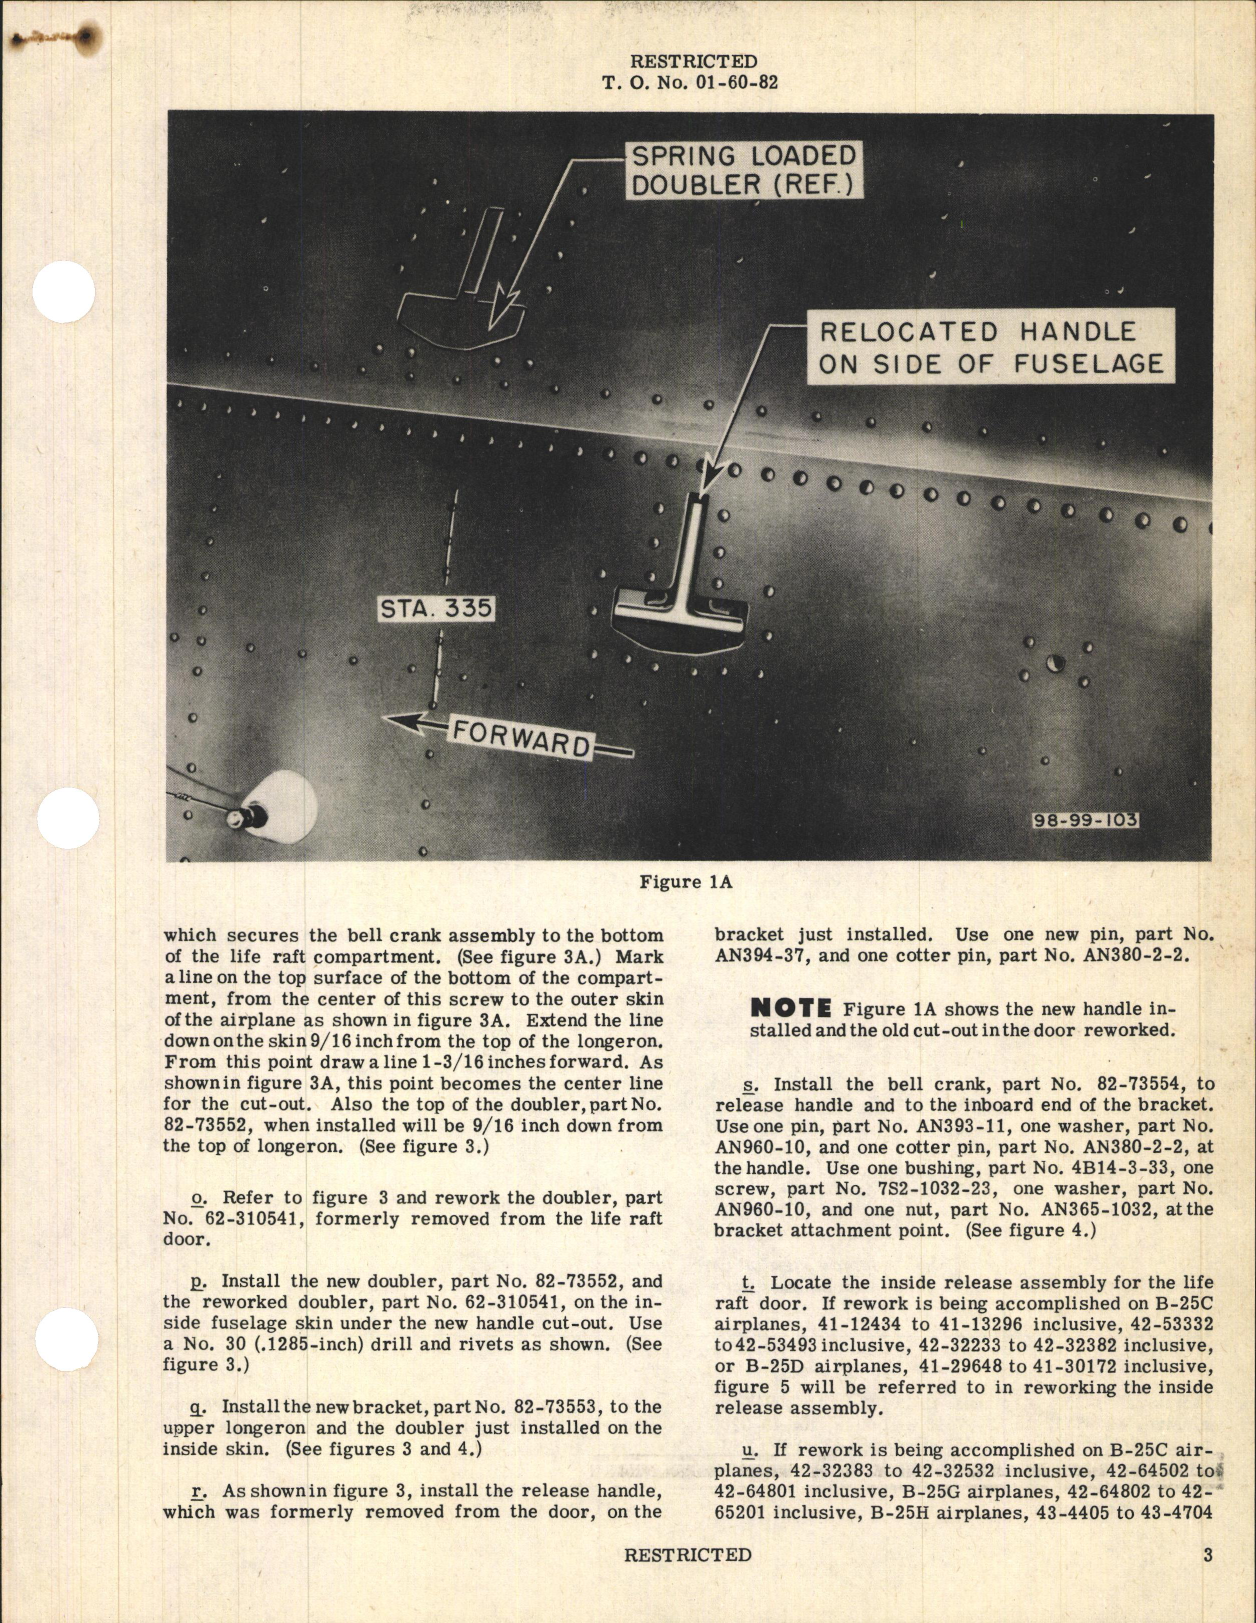 Sample page 3 from AirCorps Library document: Rework of Life Raft Release Mechanism for B-25